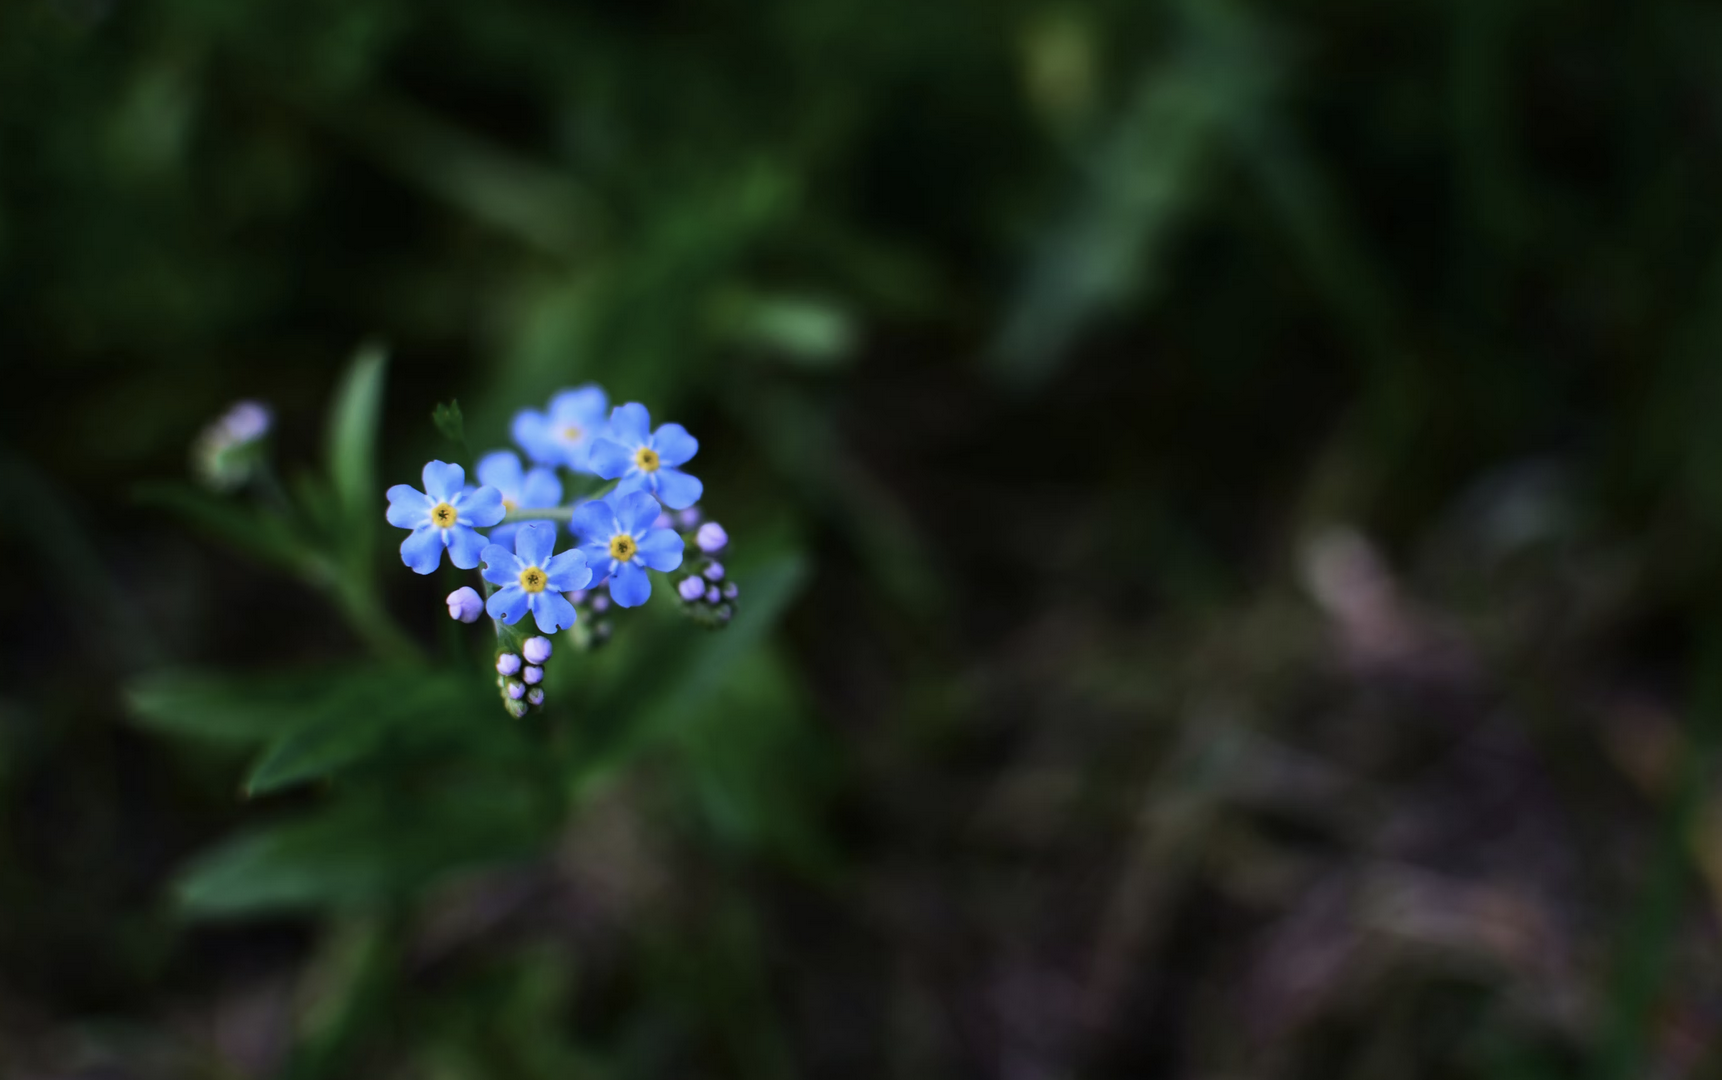 A cluster of tiny blue flowers on a black background